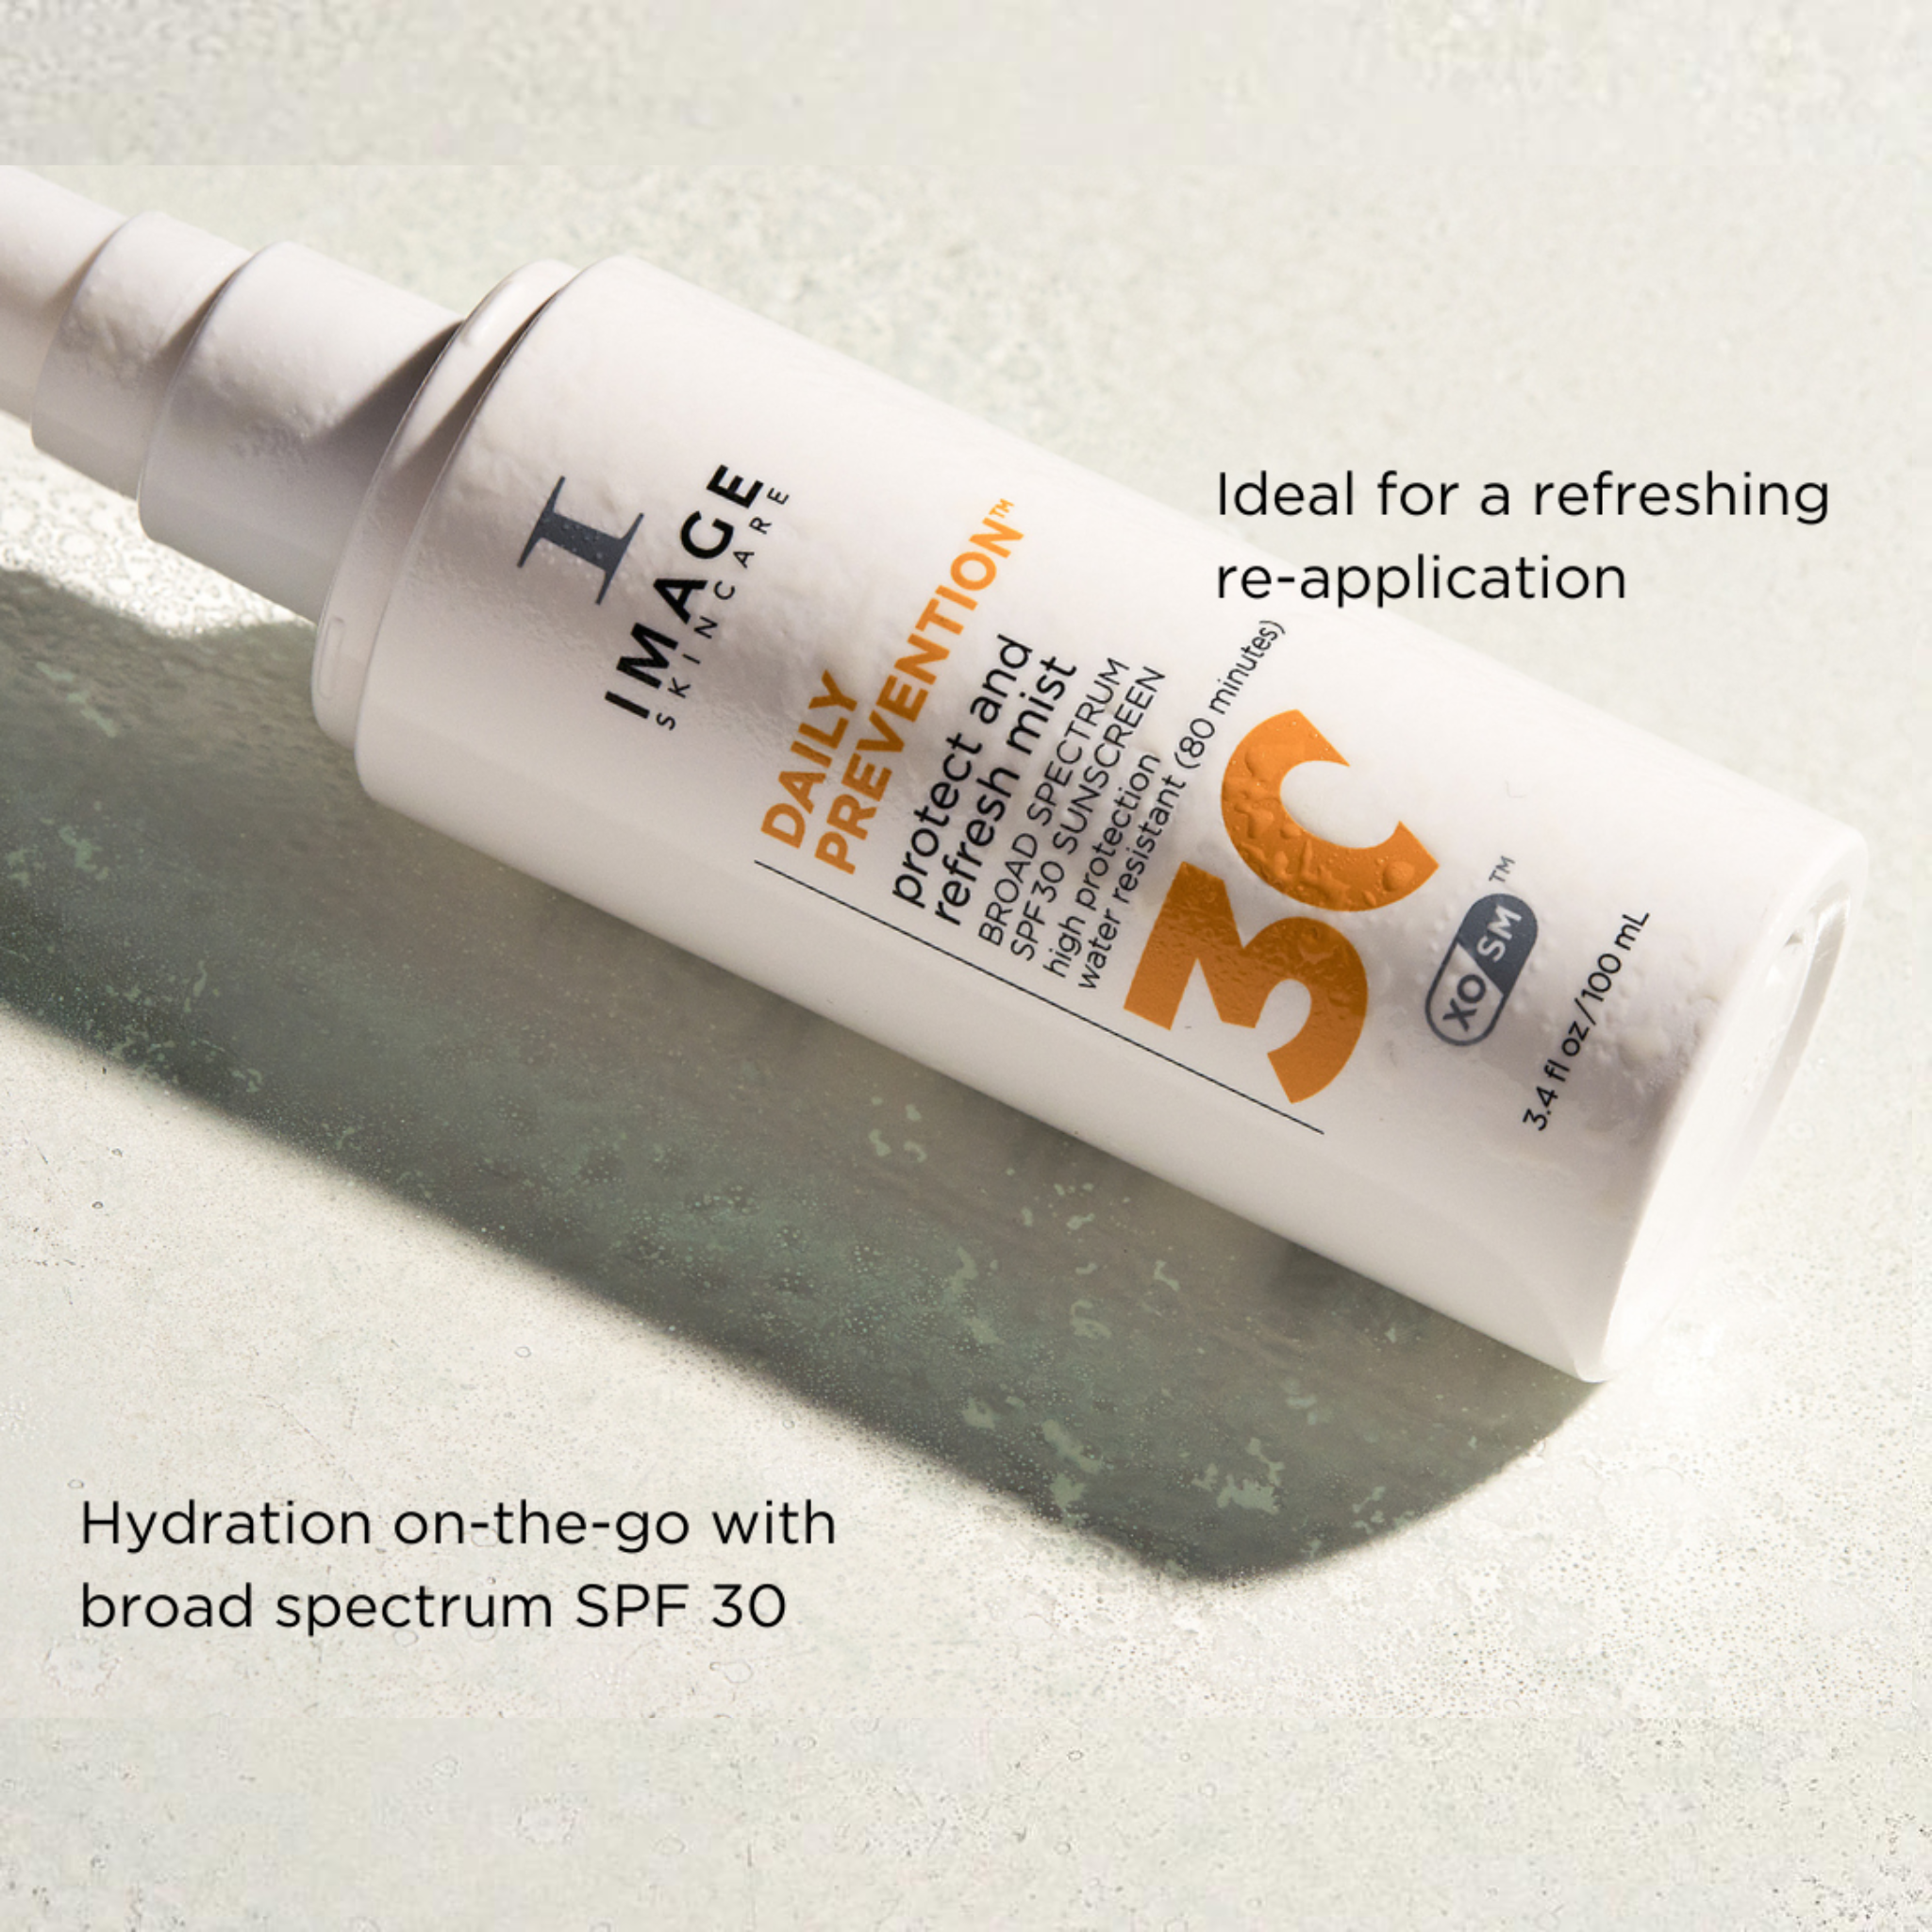 Benefits of the Daily Prevention Mist SPF 30